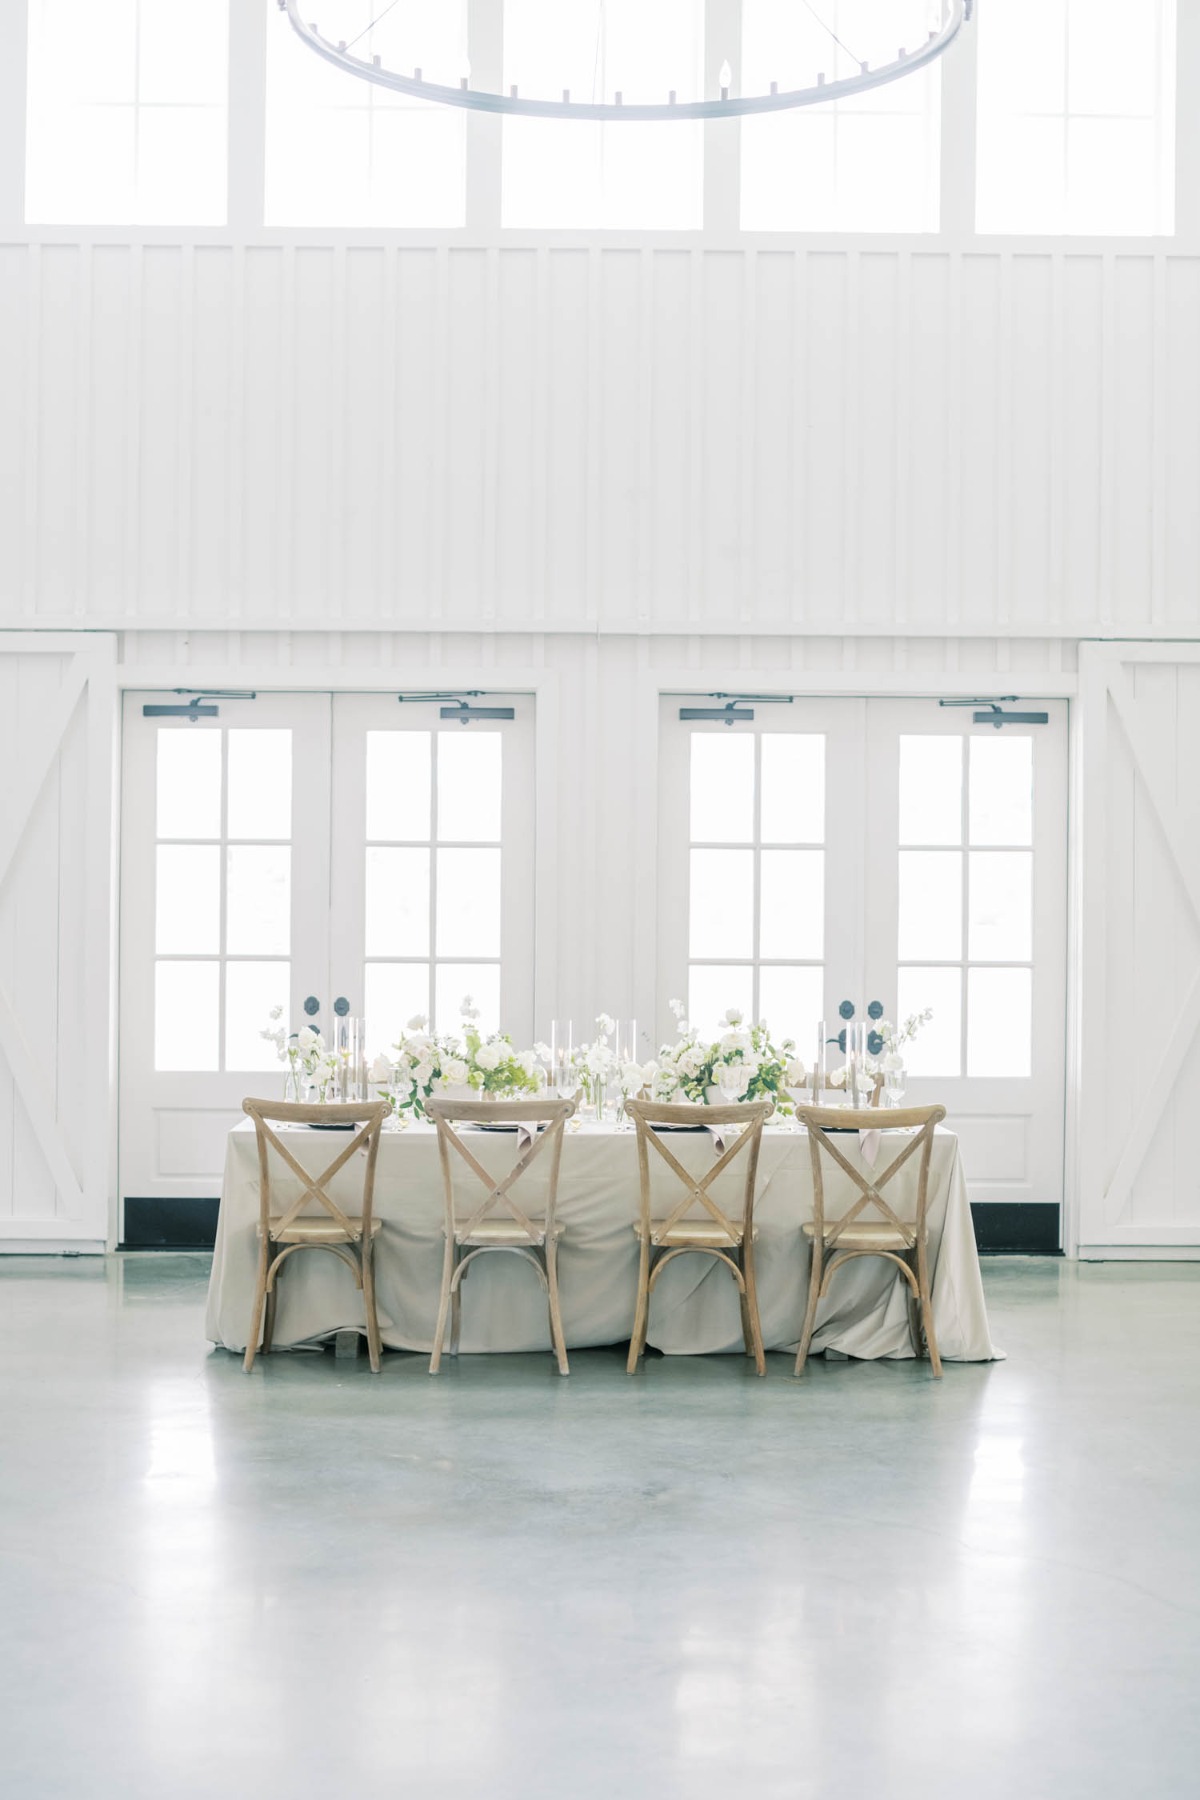 Intimate Farmhouse Inspiration Shoot With Whimsical Florals